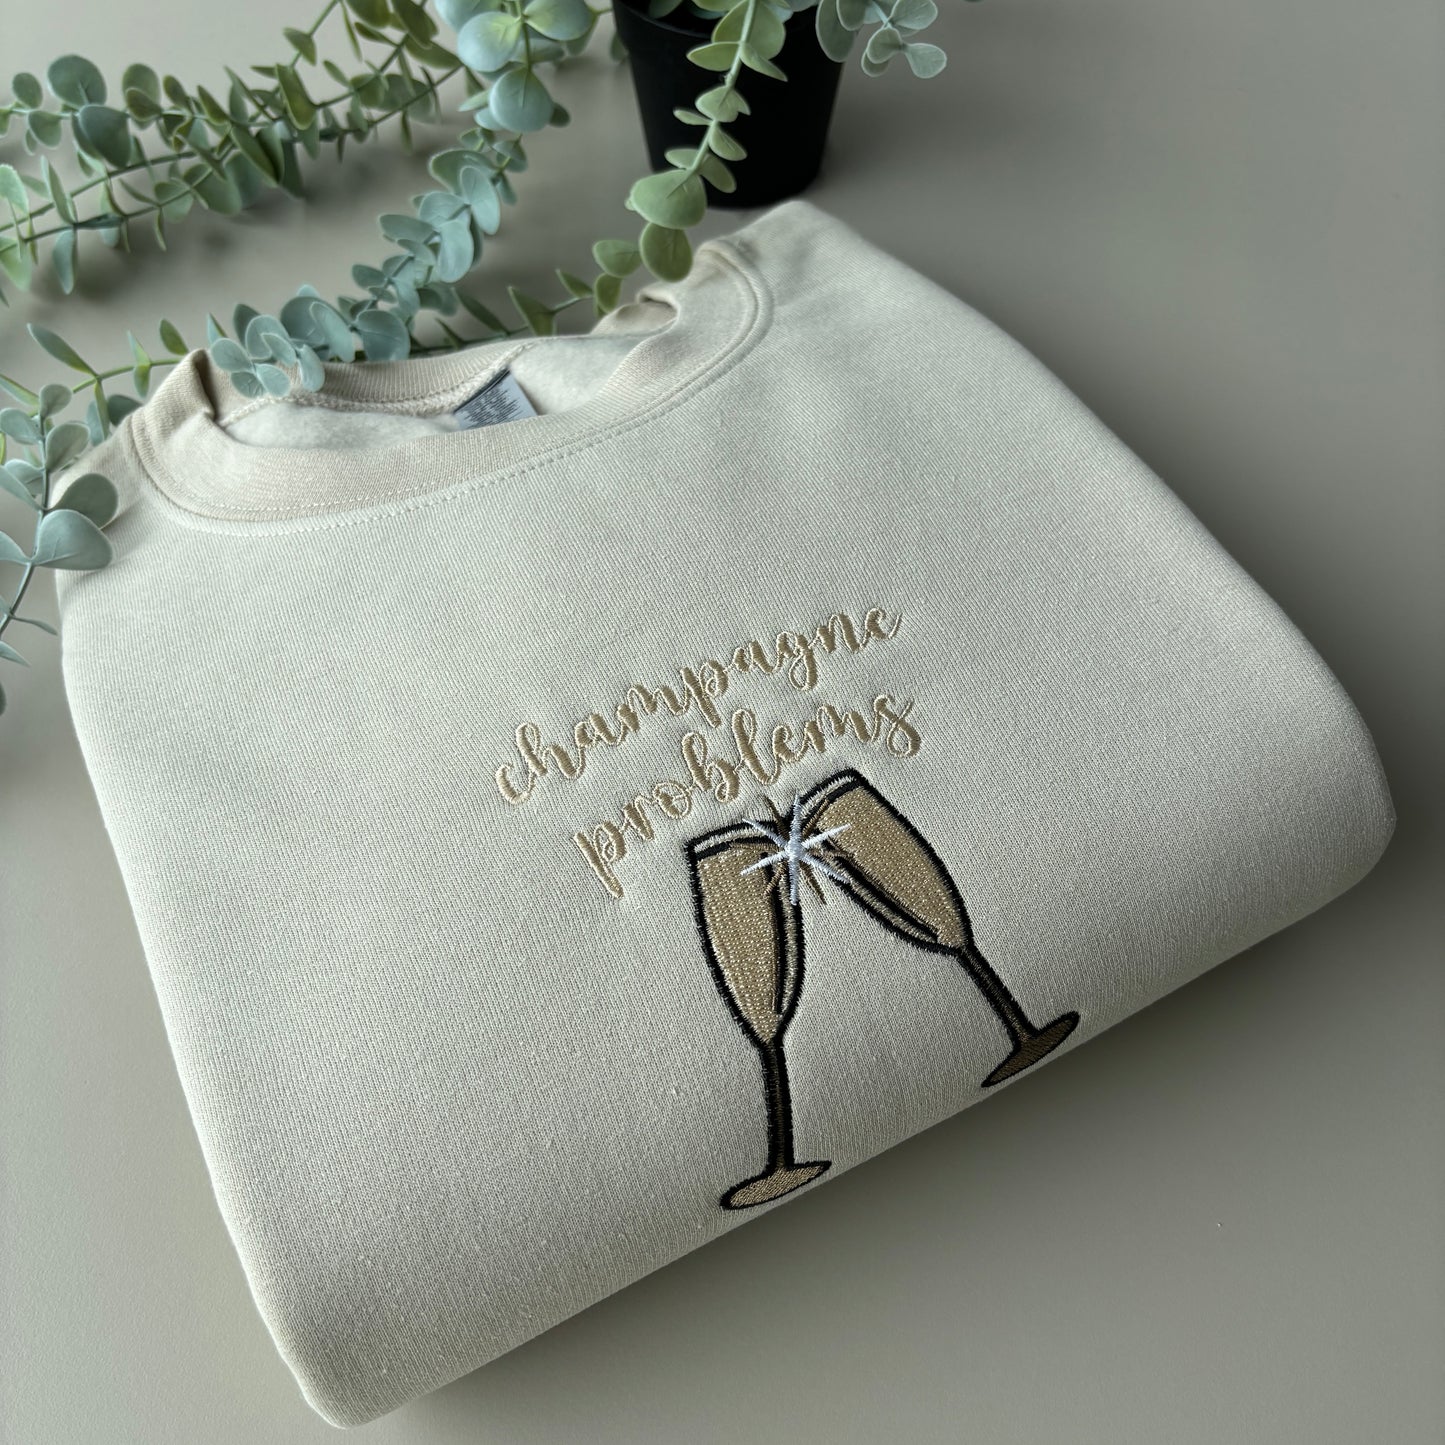 CHAMPAGNE PROBLEMS EMBROIDERED SWEATSHIRT